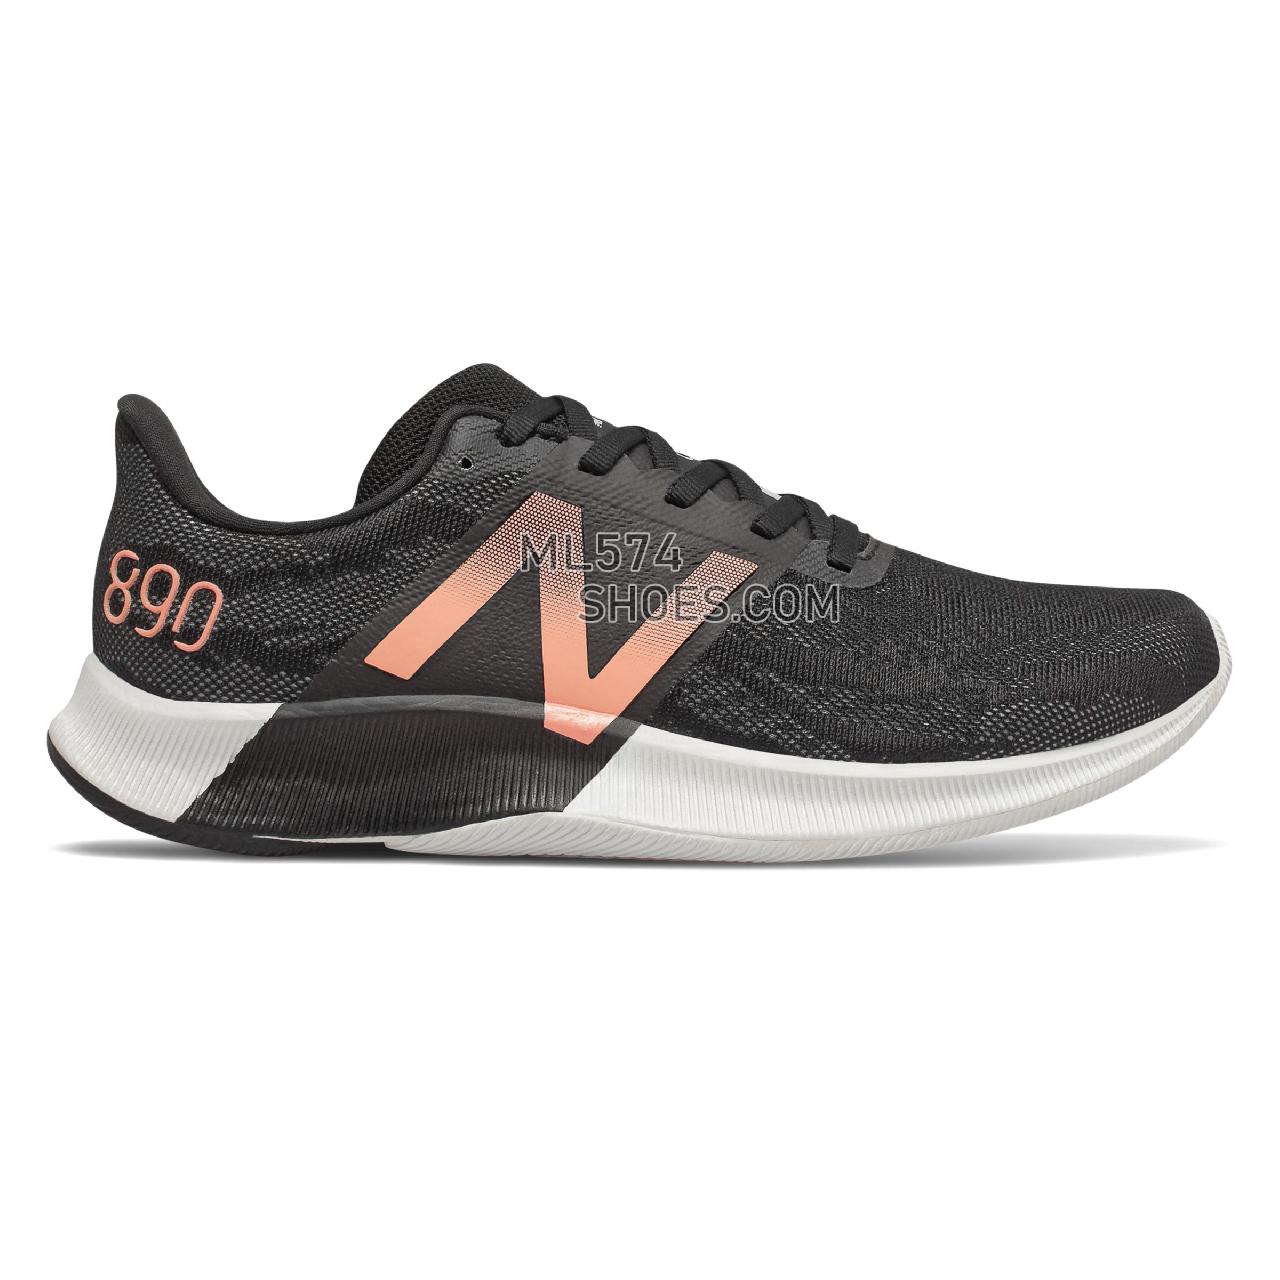 New Balance FuelCell 890v8 - Women's 800 Series - Thunder with Ginger Pink - W890GM8